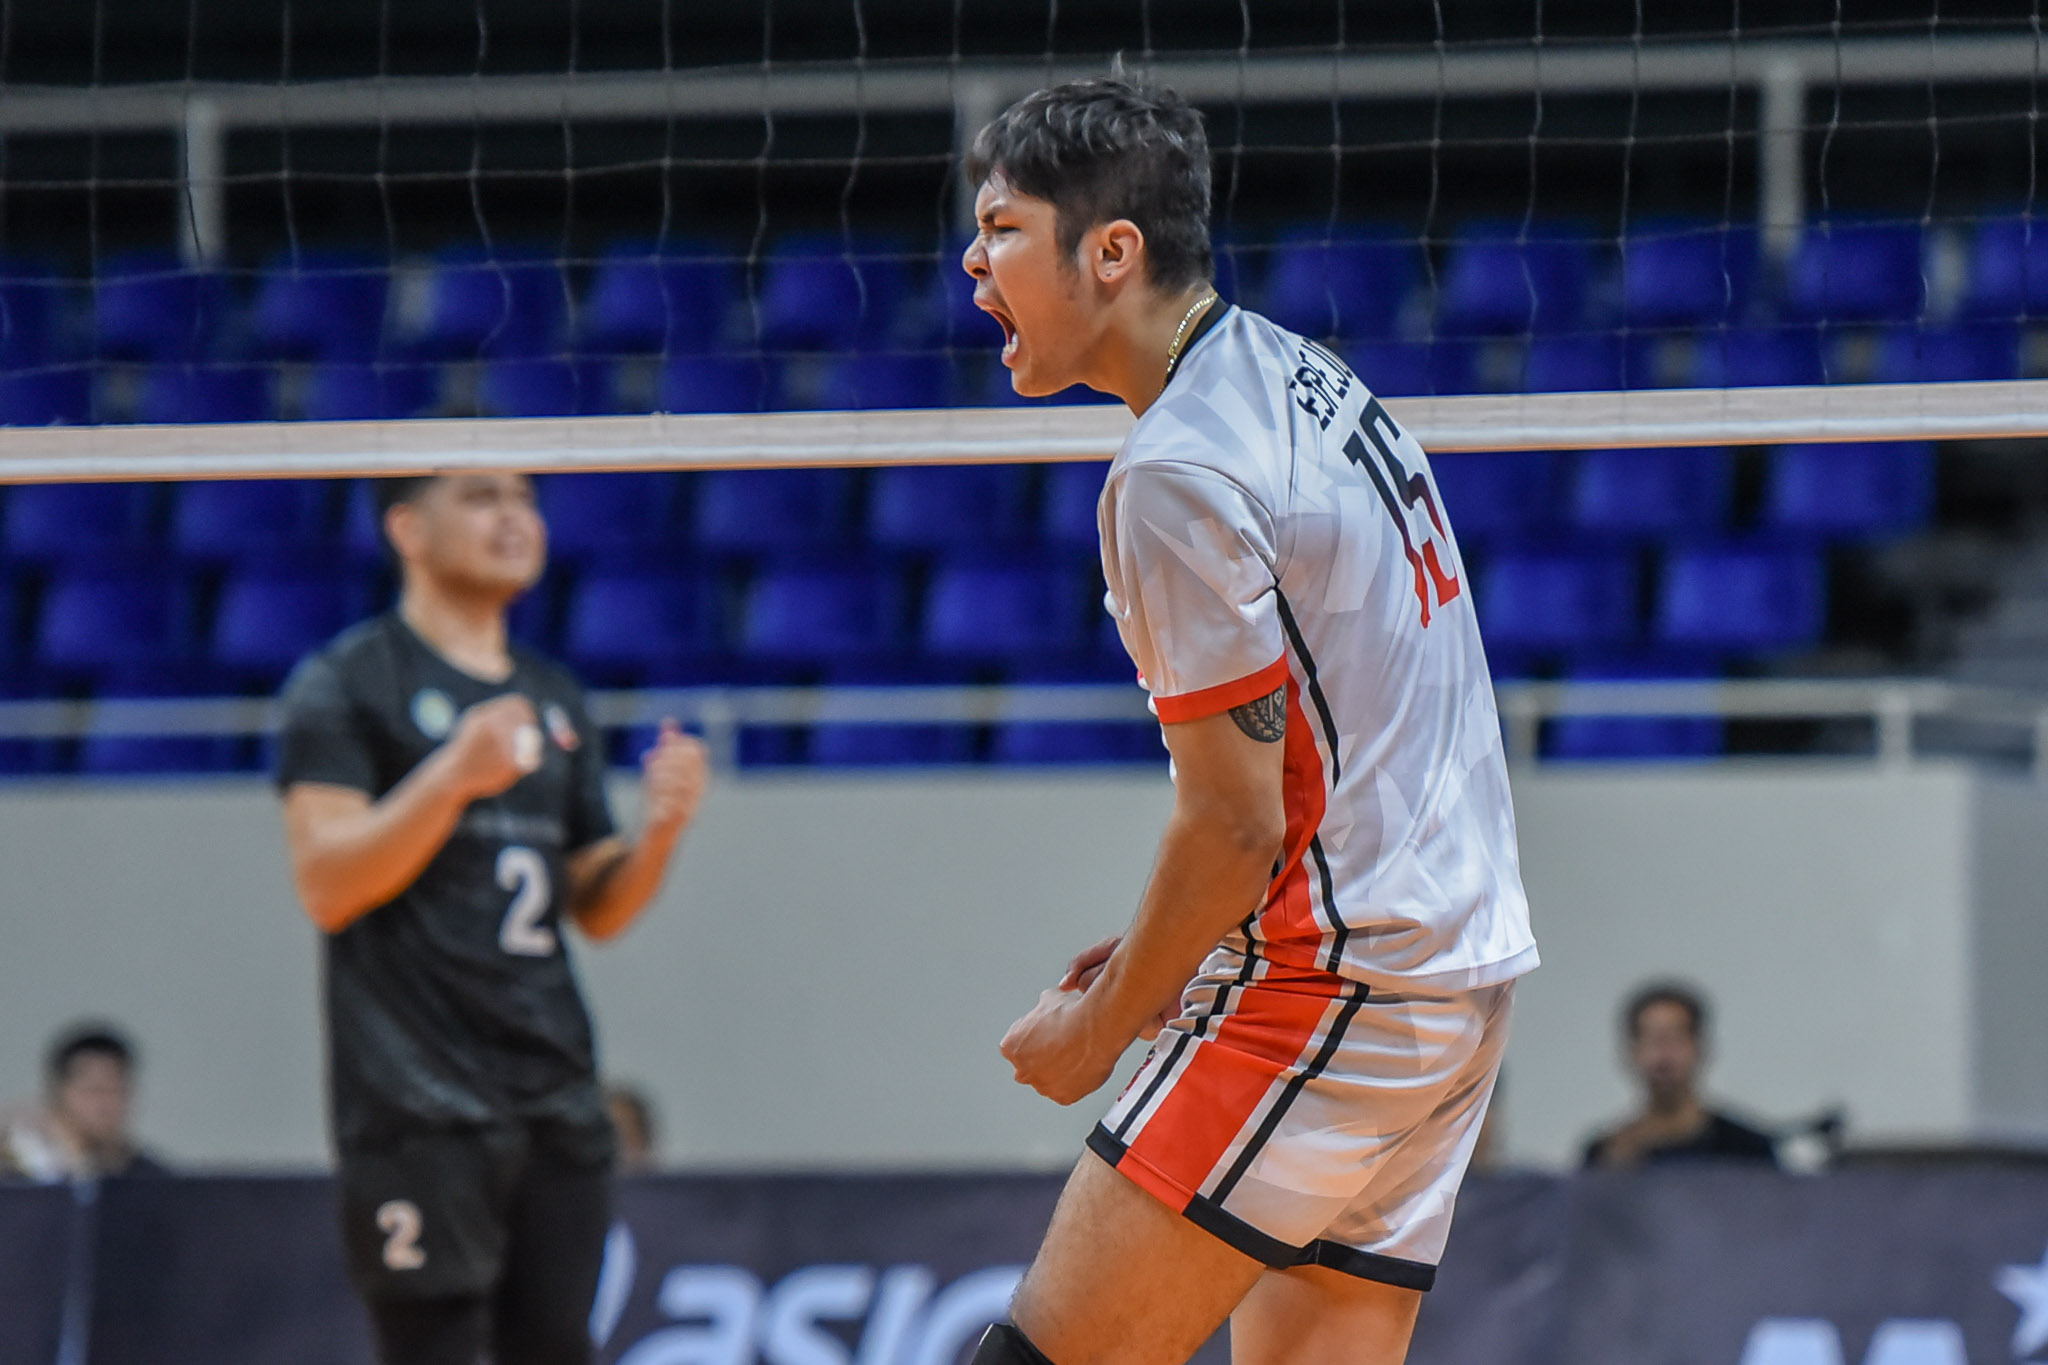 ST-2023-Finals-G1-Cignal-vs.-Cotabato-Marck-Espejo-4044 Marck Espejo braces for Game 2 dogfight News Spikers' Turf Volleyball  - philippine sports news